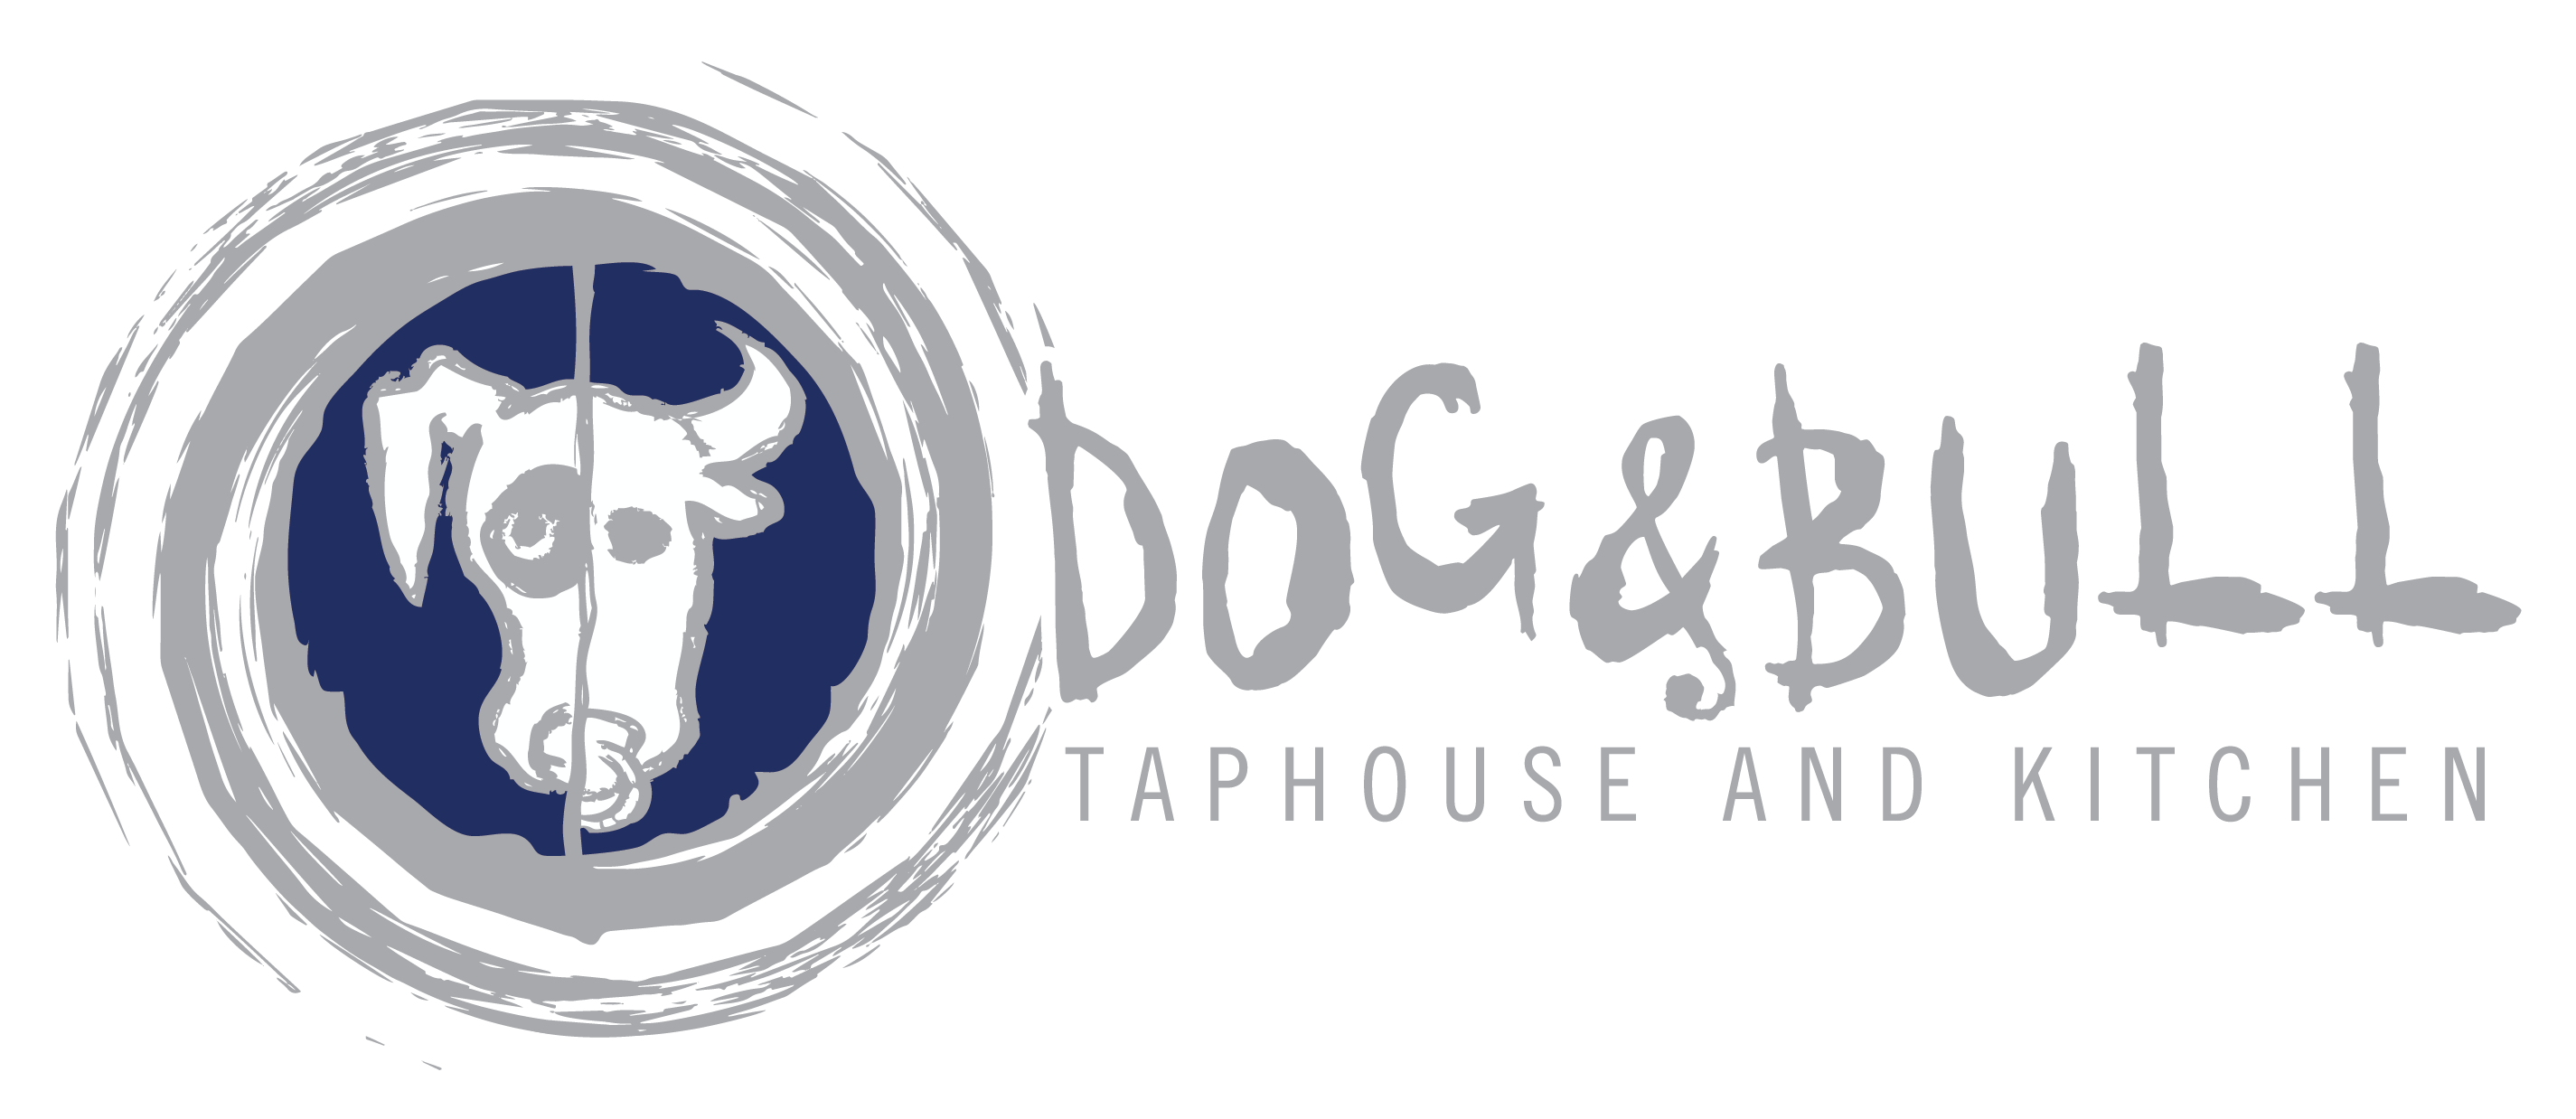 Dog & bull taphouse and kitchen.